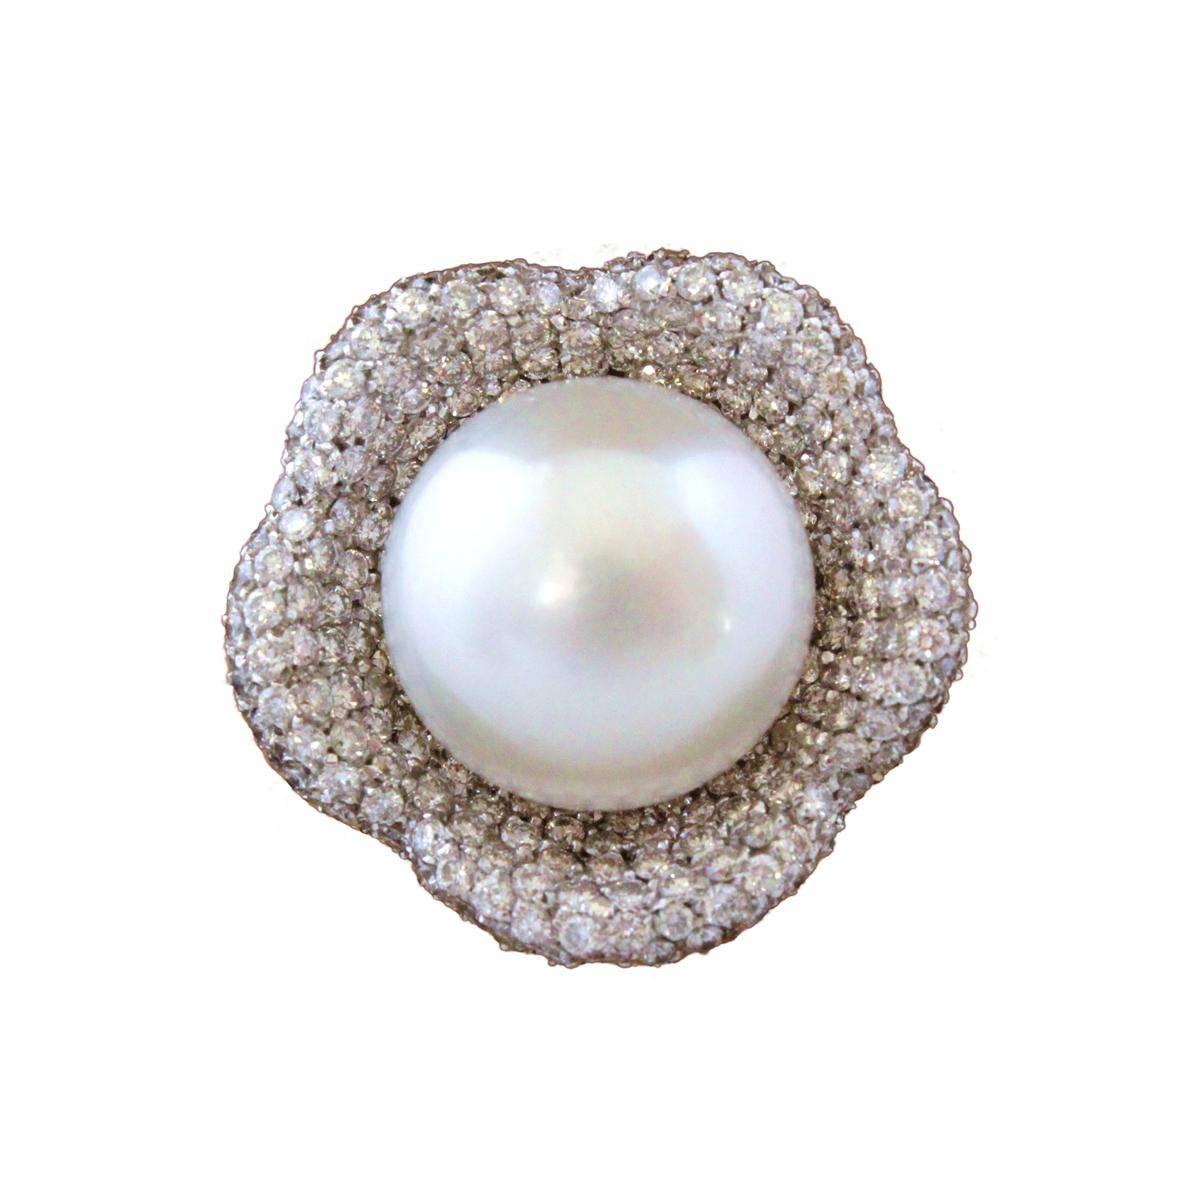 Masterpiece by Ghidini, Brescia, Italy
December 2015
Australian pearl
7,10 ct diamonds, brilliant cut 
Size 48 (15,29 mm), can be enlarged without any problems
With warranty and original case
Worldwide express shipping included in the price !